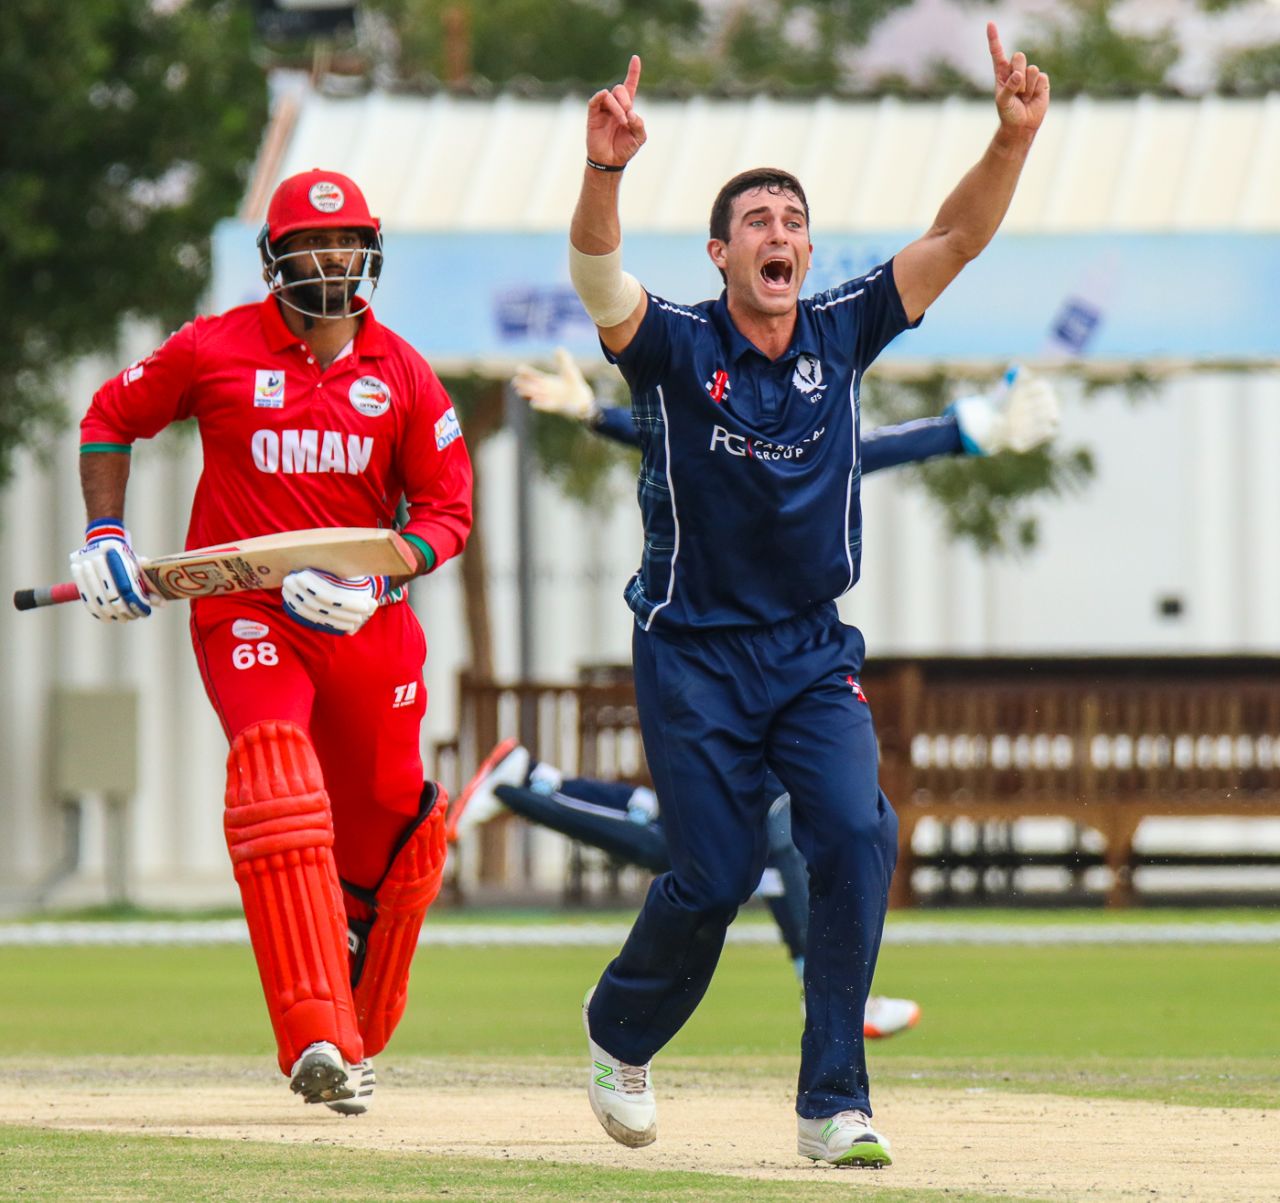 Ruaidhri Smith nabs Khawar Ali with a successful lbw appeal during his spell of 4 for 7, Oman v Scotland, Al Amerat, February 19, 2019